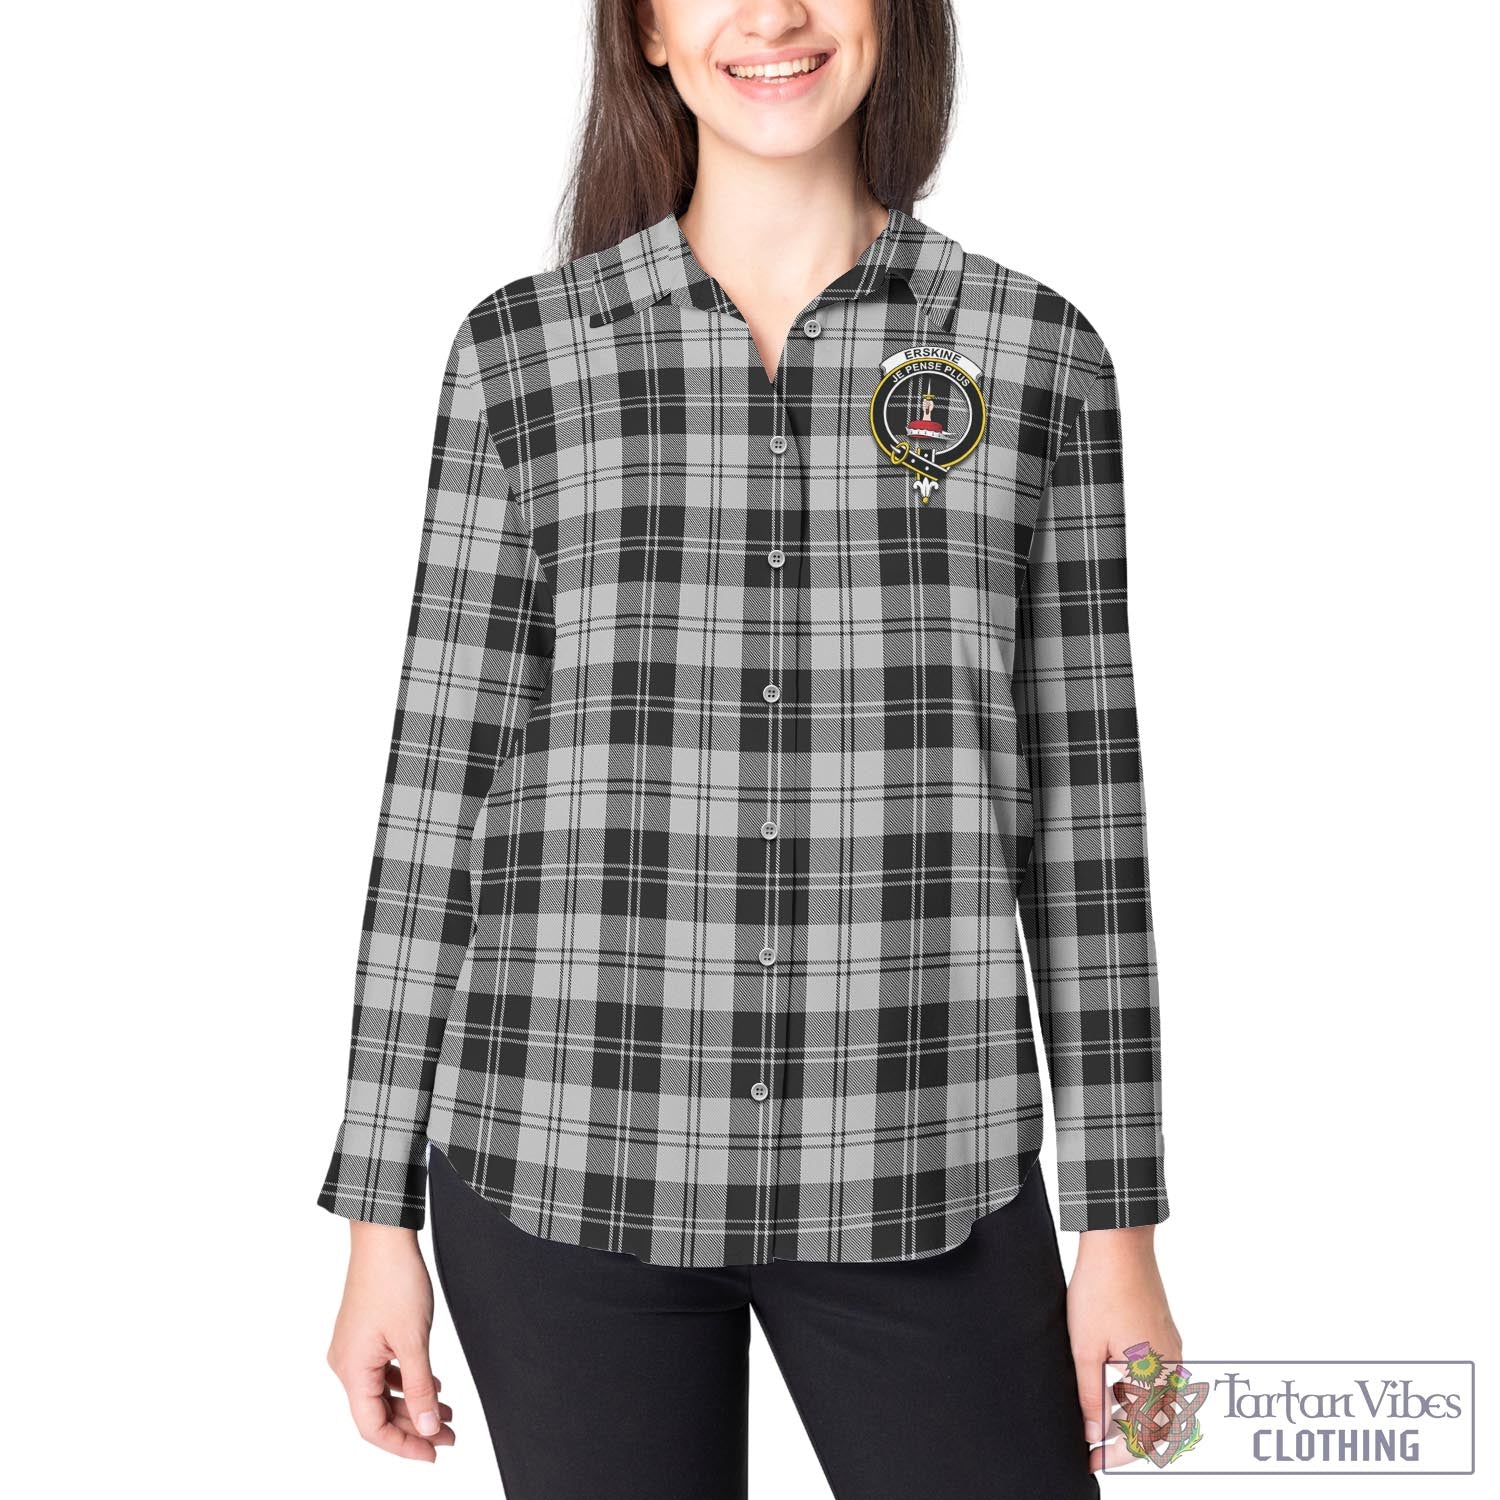 Tartan Vibes Clothing Erskine Black and White Tartan Womens Casual Shirt with Family Crest